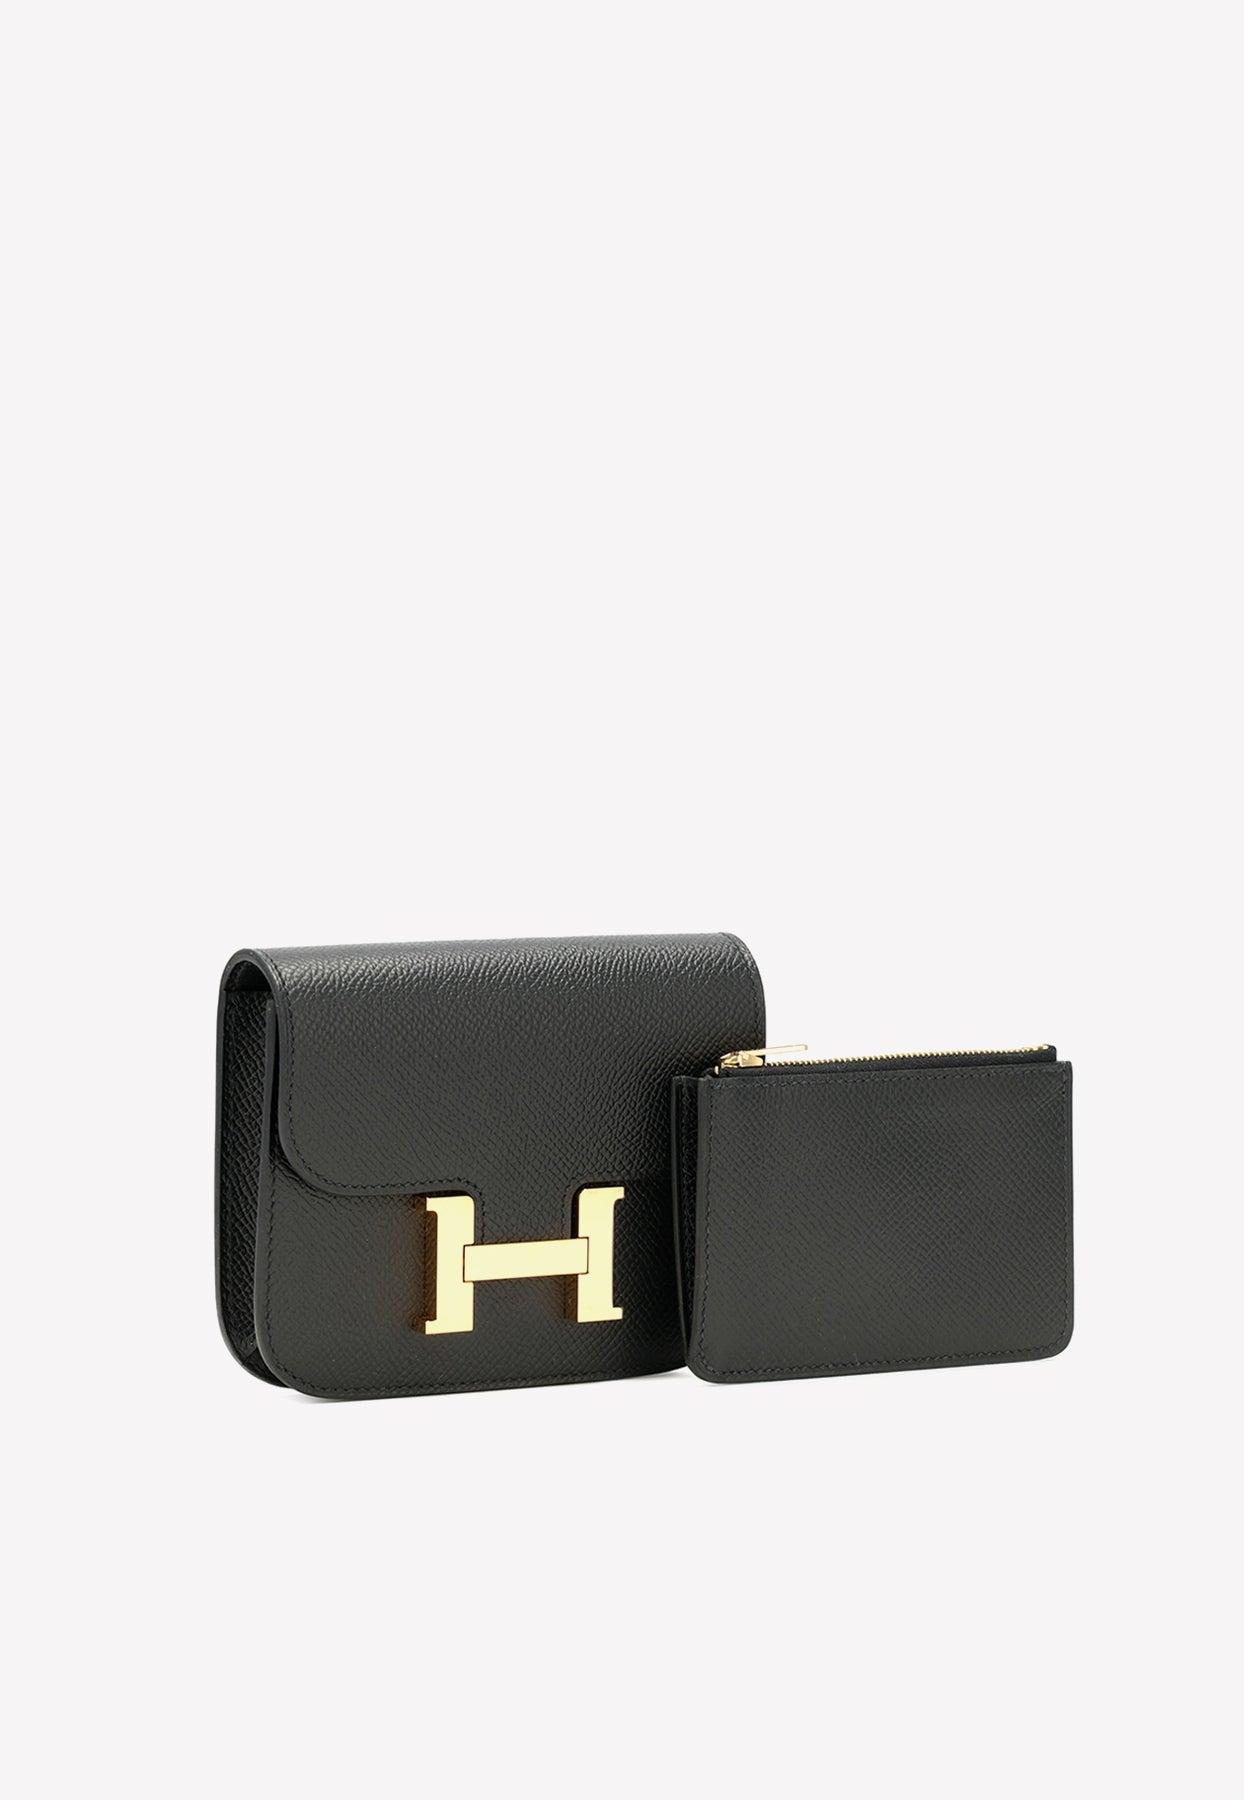 Hermes Constance Compact Wallet Togo Leather Palladium Hardware In Black